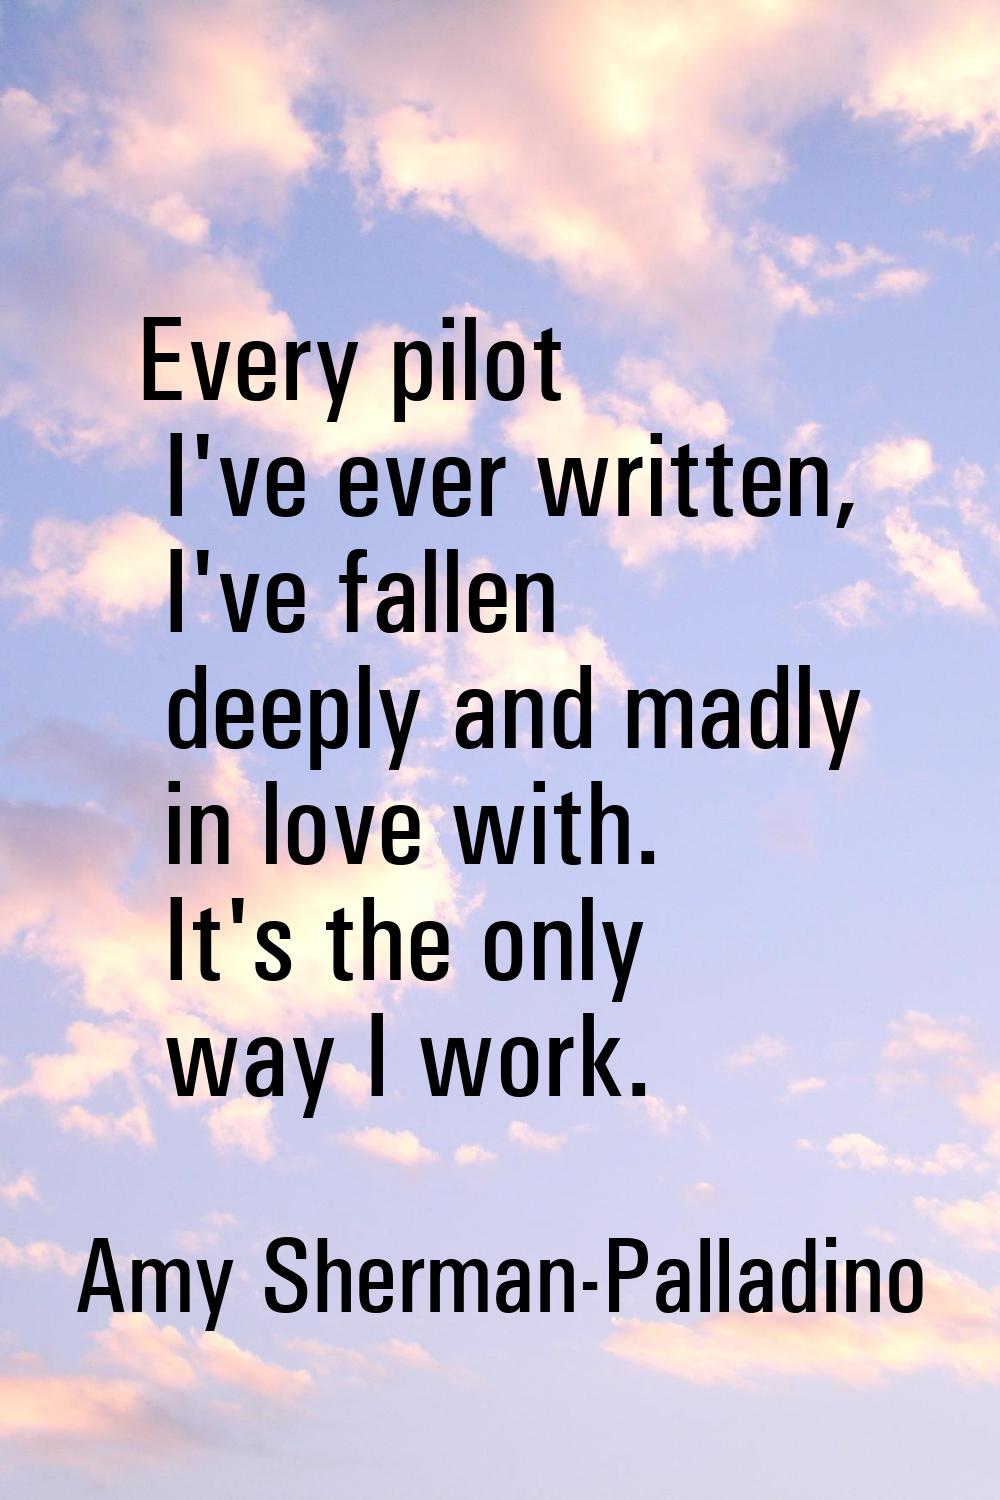 Every pilot I've ever written, I've fallen deeply and madly in love with. It's the only way I work.